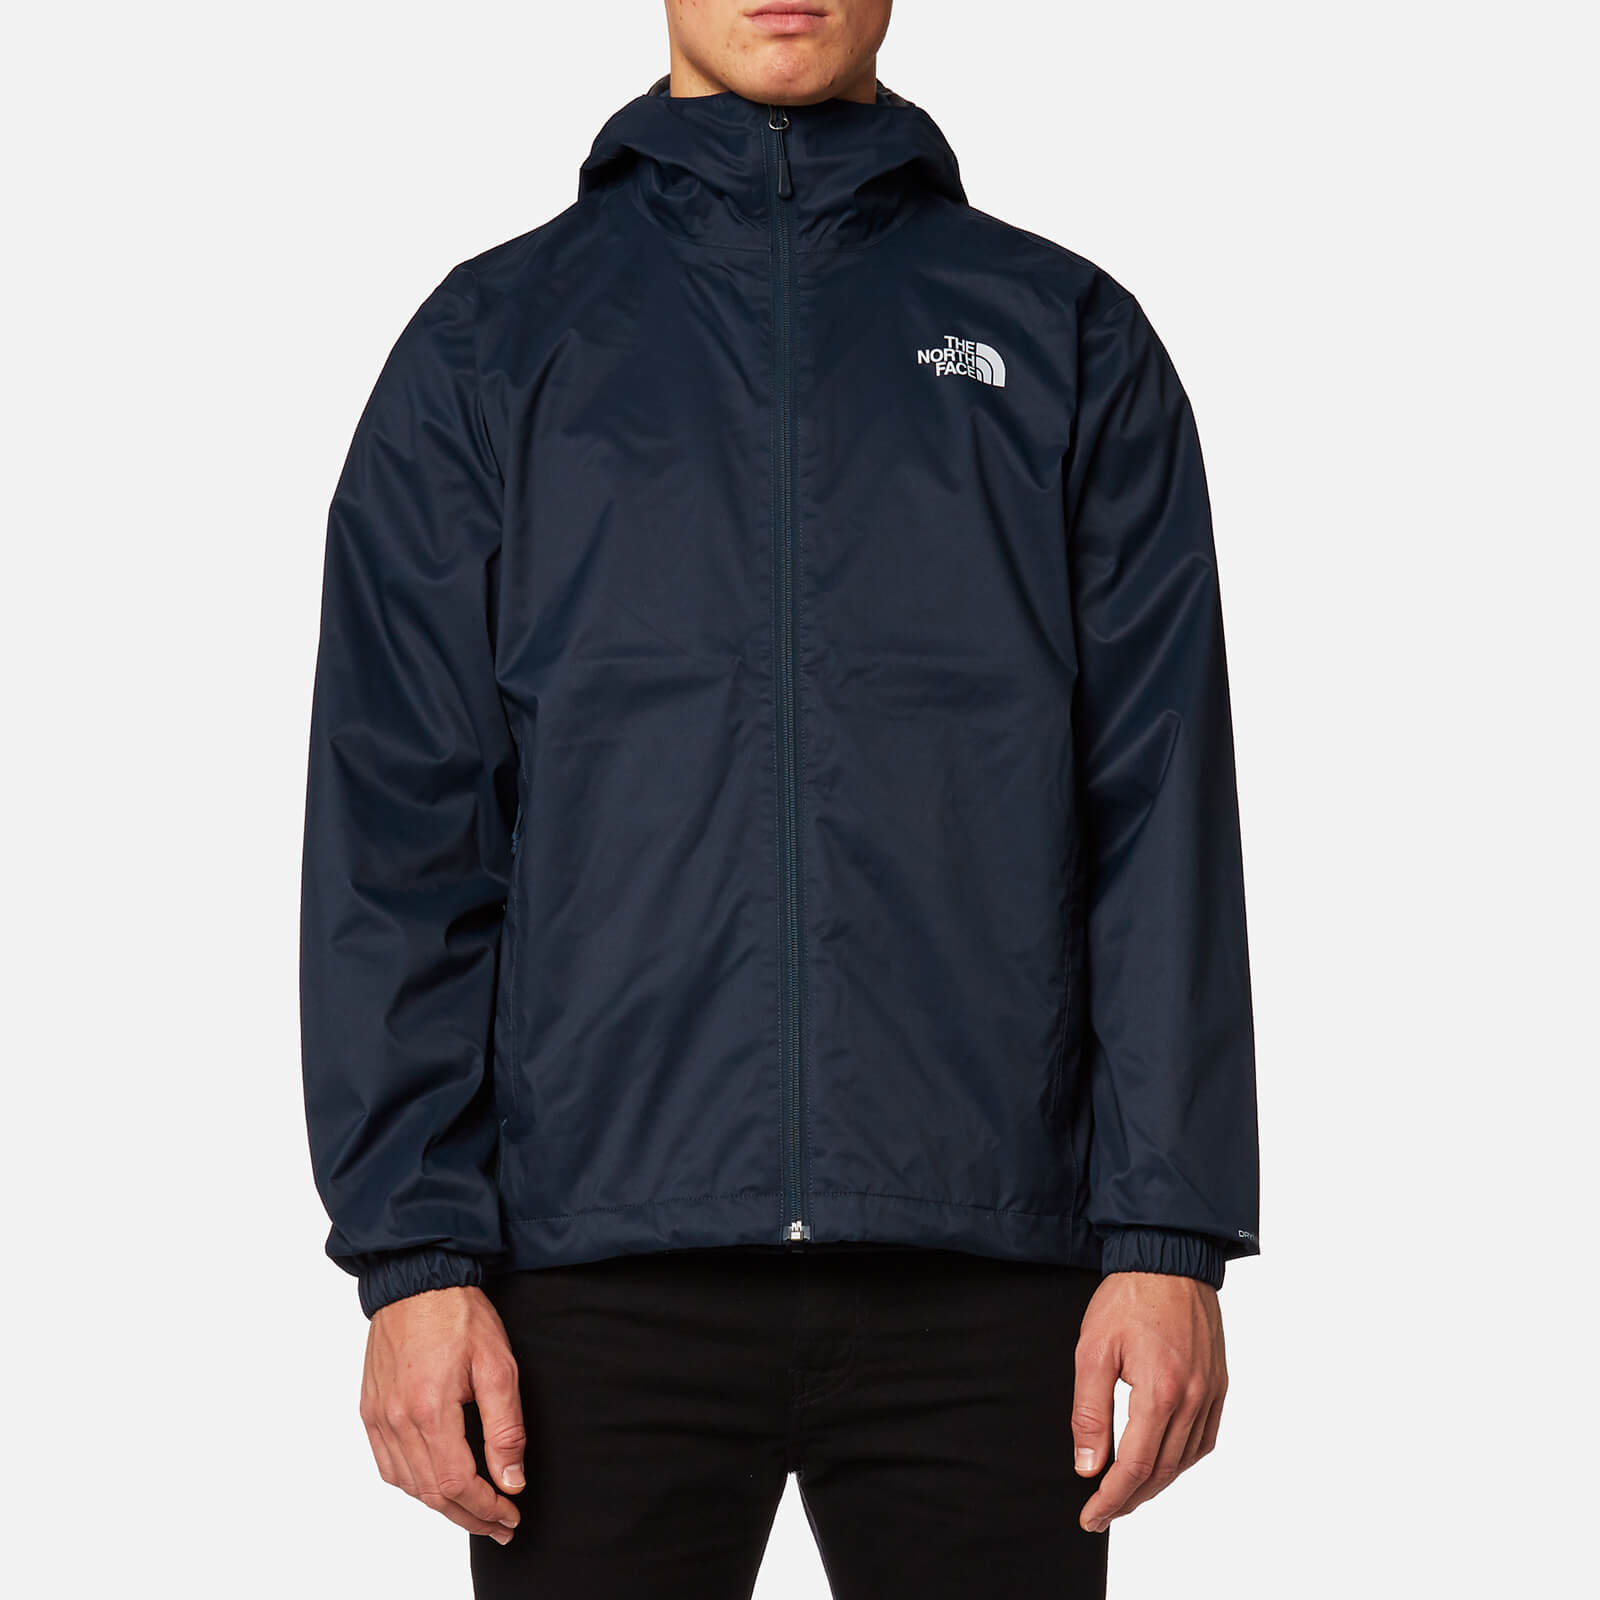 The North Face Men's Quest Jacket - Urban Navy - S